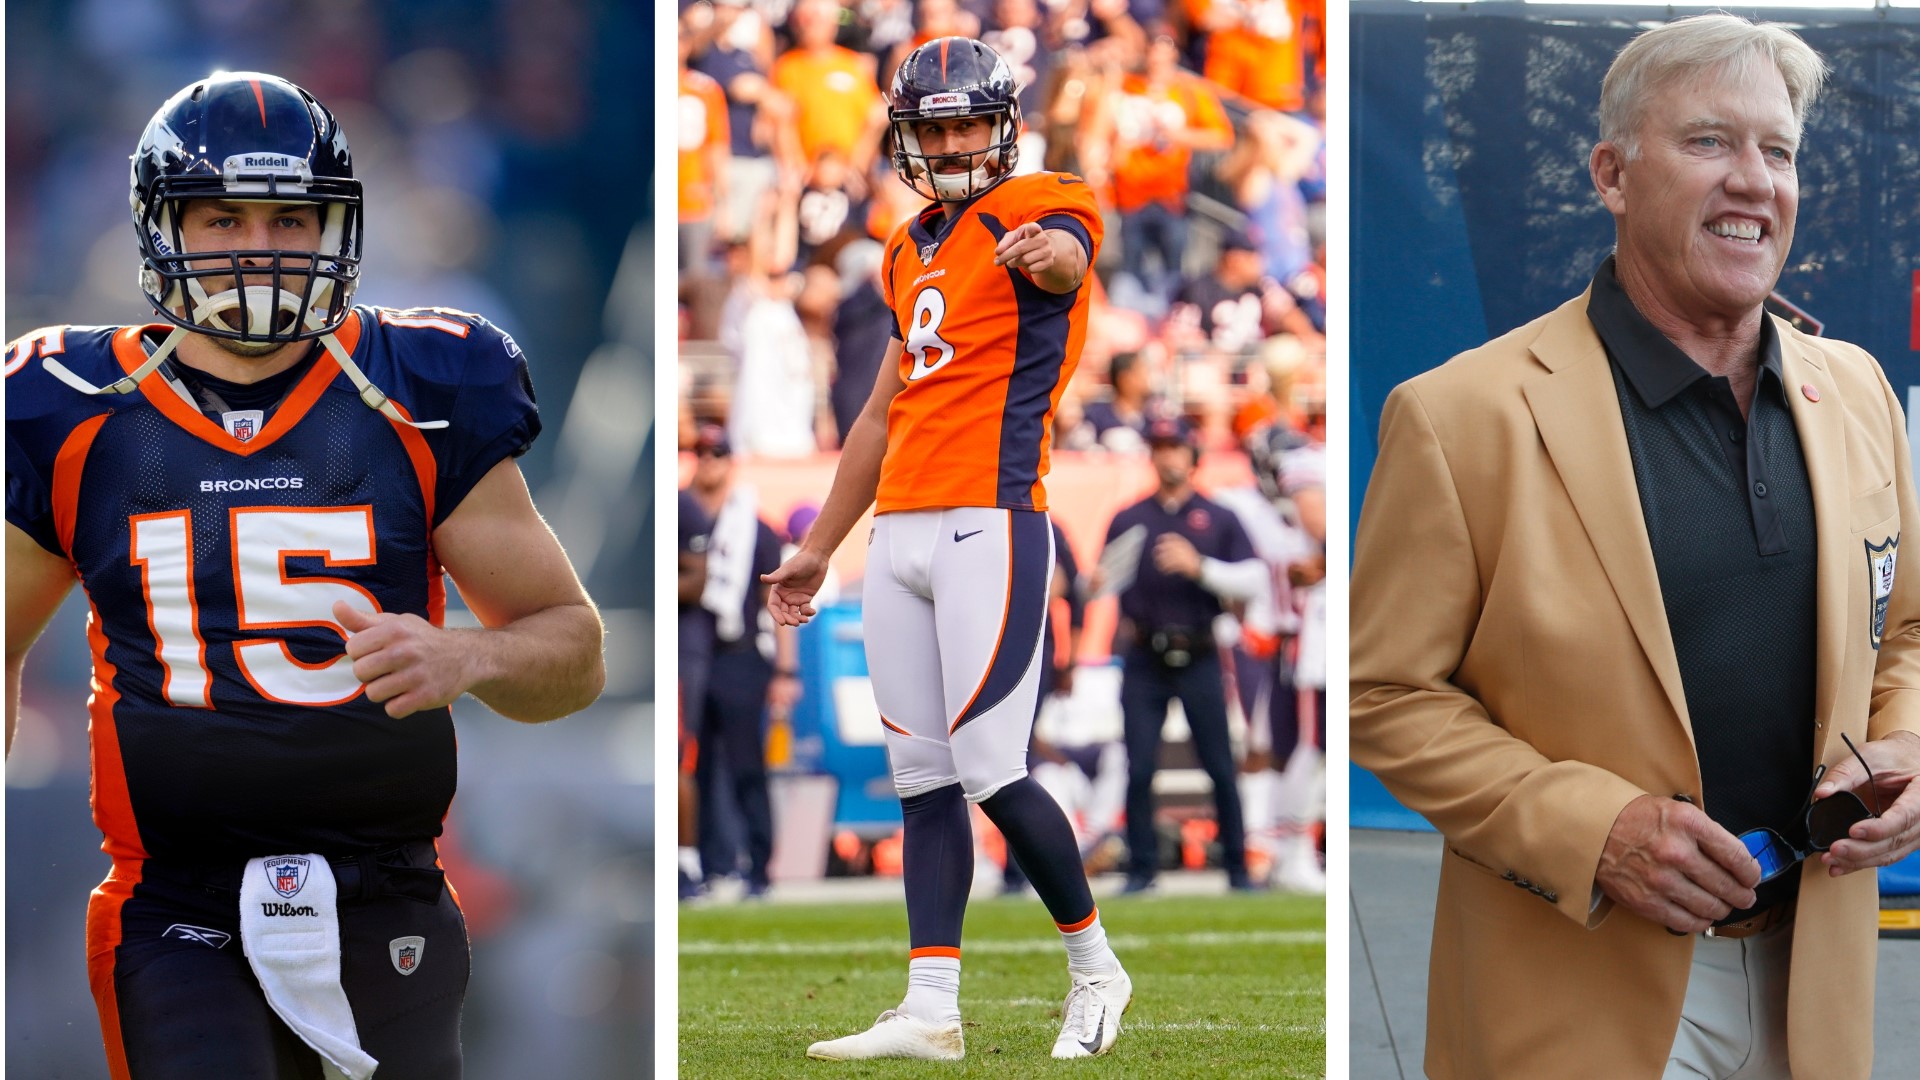 Notable NFL trades by the Denver Broncos